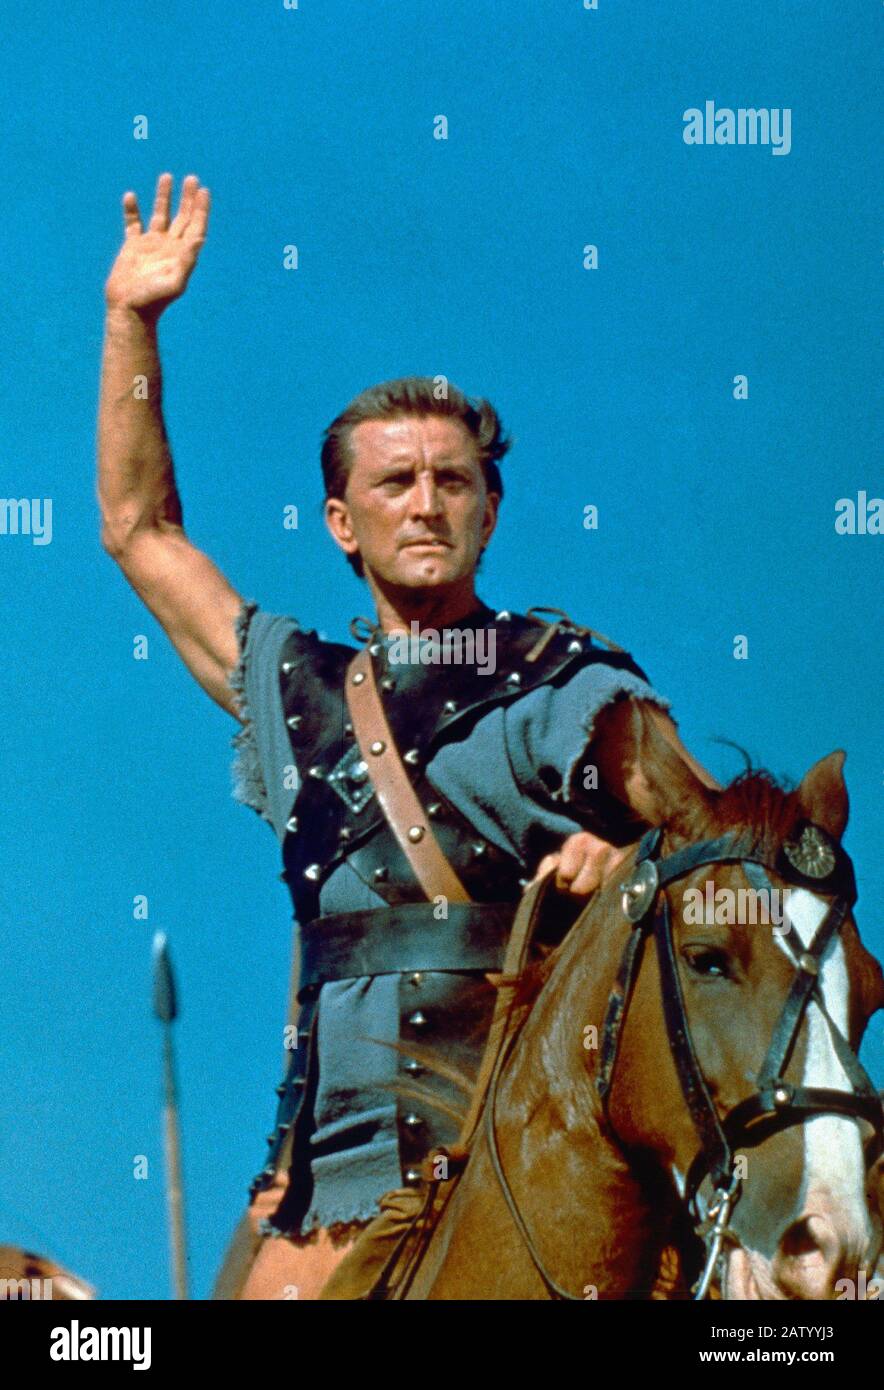 ***FILE PHOTO*** Kirk Douglas Has Passed Away At 103 Years Of Age. CA, USA. Kirk Douglas in the © Universal Pictures film: Spartacus (1960). Supplied by Landmark/MediaPunch. Stock Photo